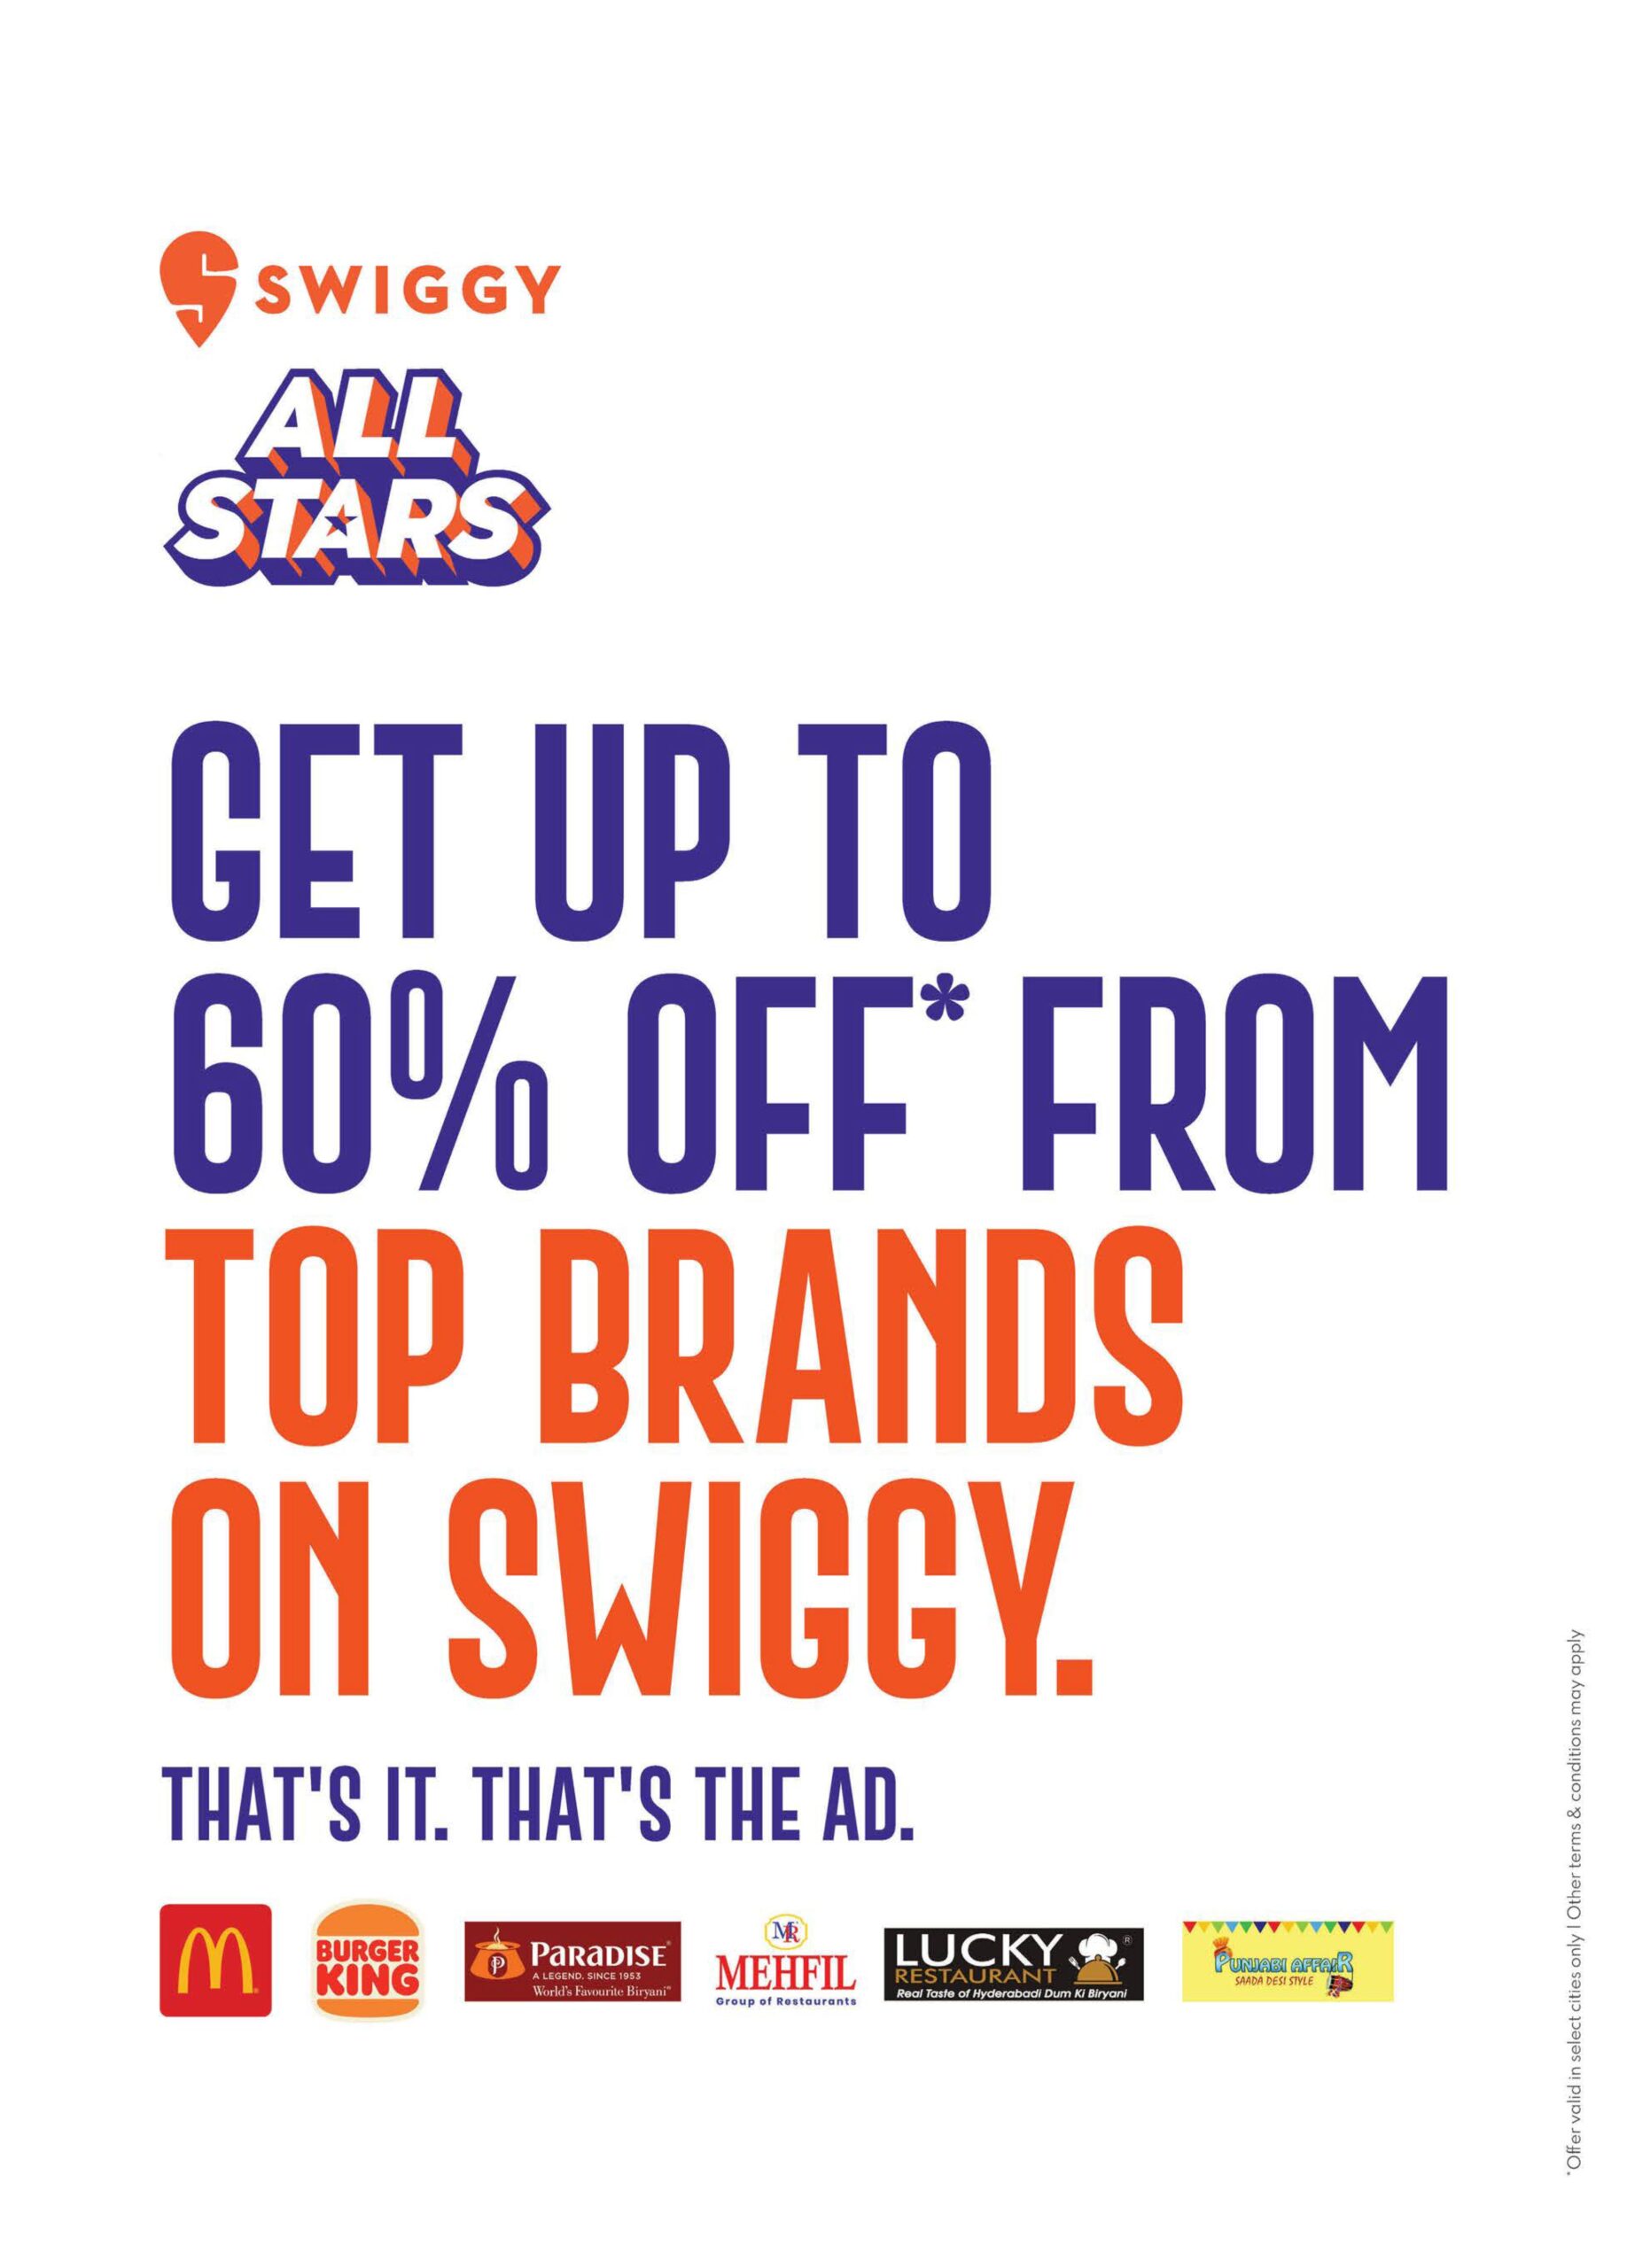 swiggy-all-stars-get-up-to-60%-off-from-top-brands-on-swiggy-ad-deccan-chronicle-hyderabad-10-7-2021